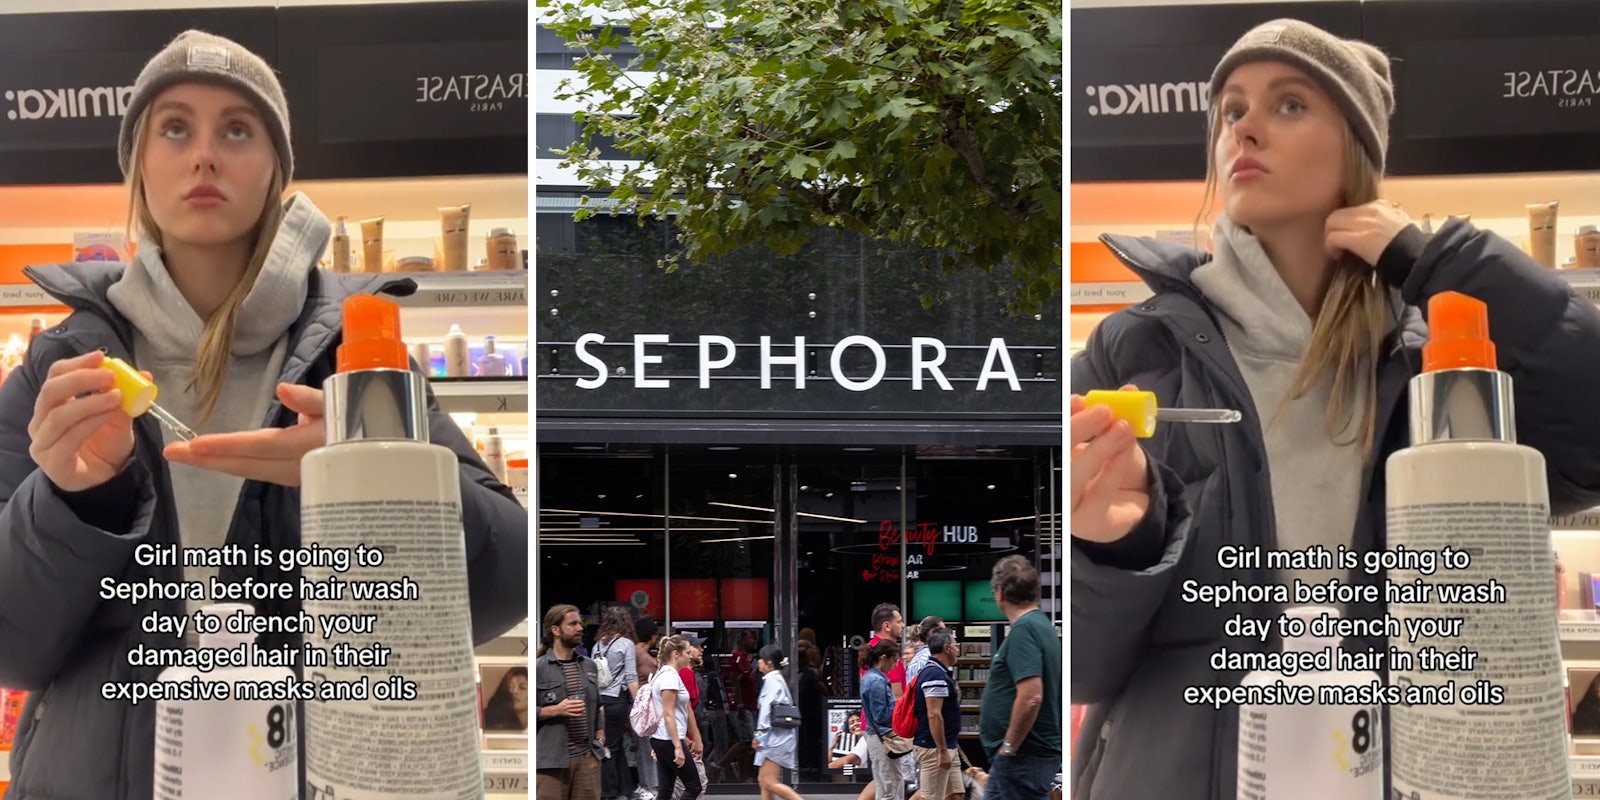 customer goes to the aisles of Sephora to put on hair masks before 'hair wash day'